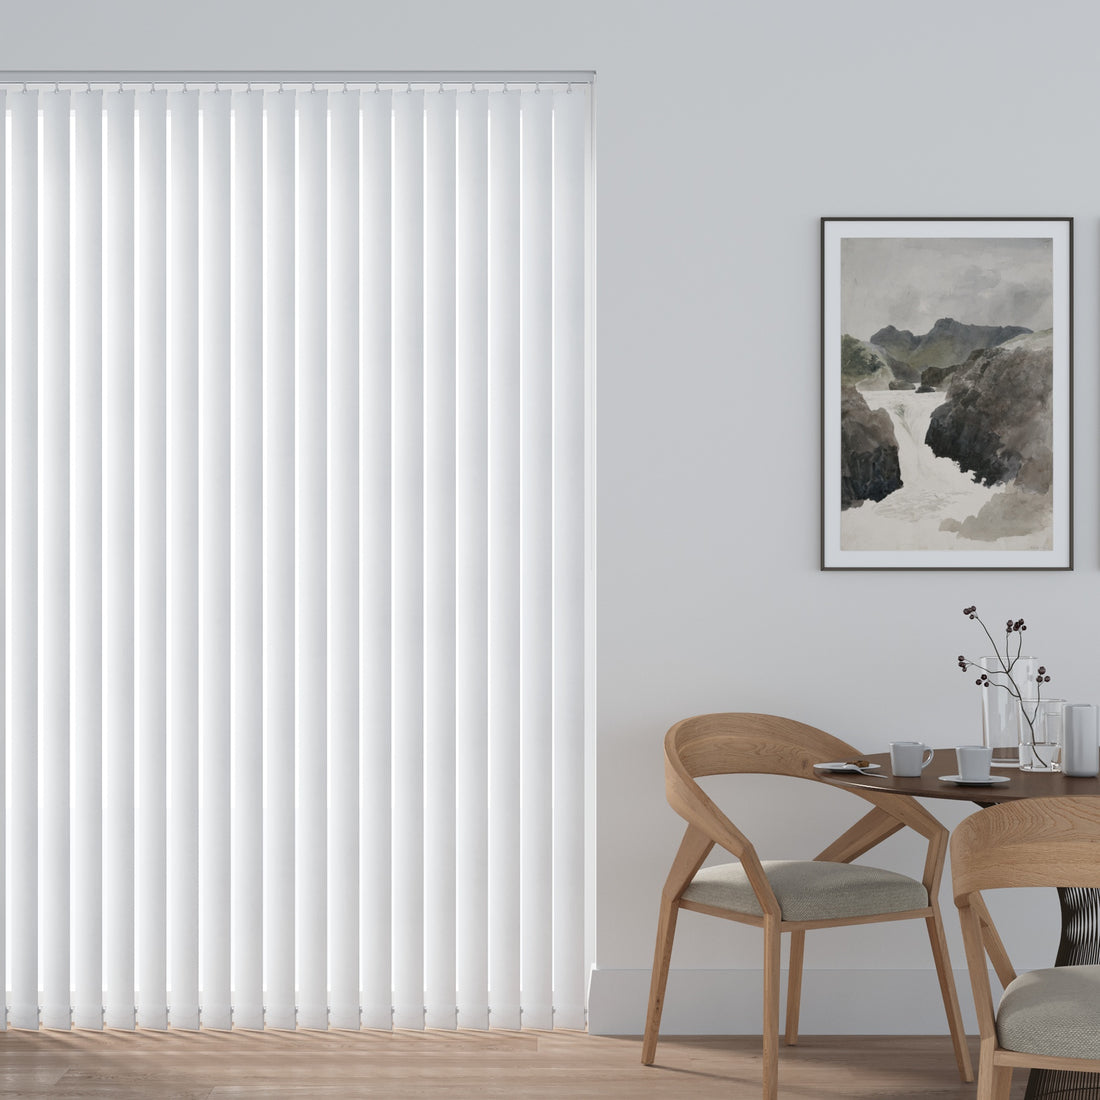 Hambrook Snow – White Replacement Slats